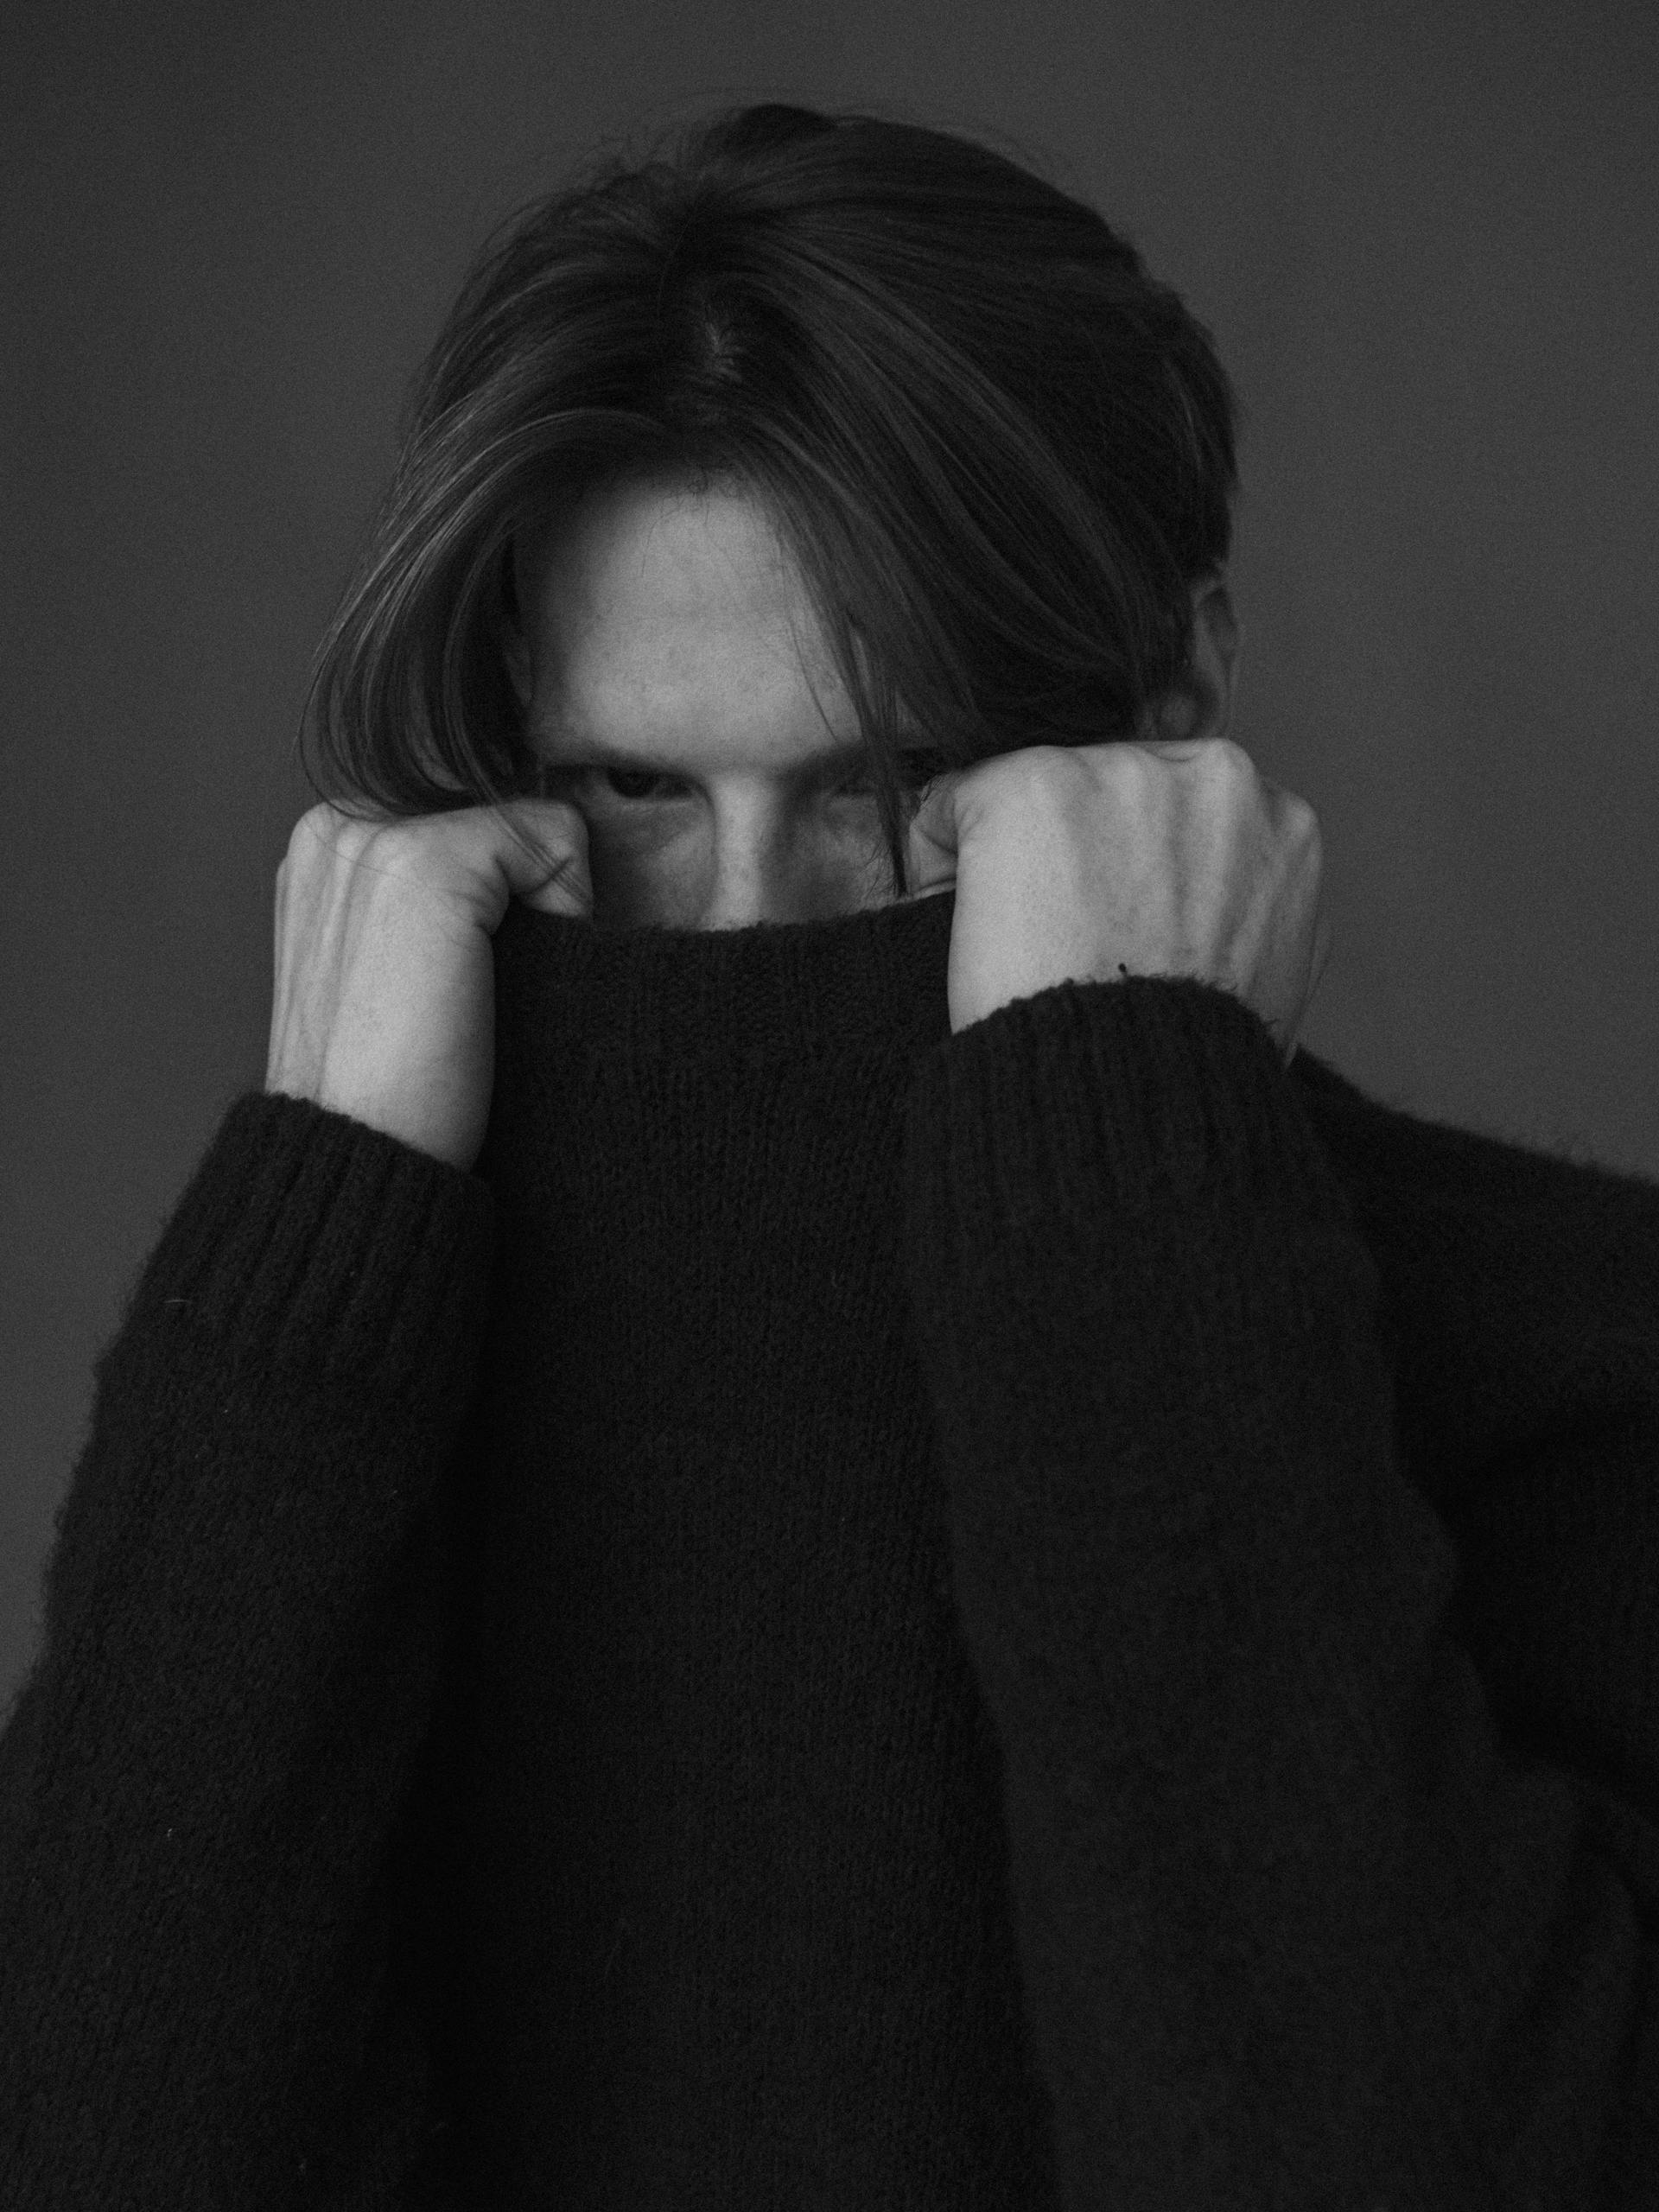 A man pulling up his sweater to cover his face | Source: Pexels